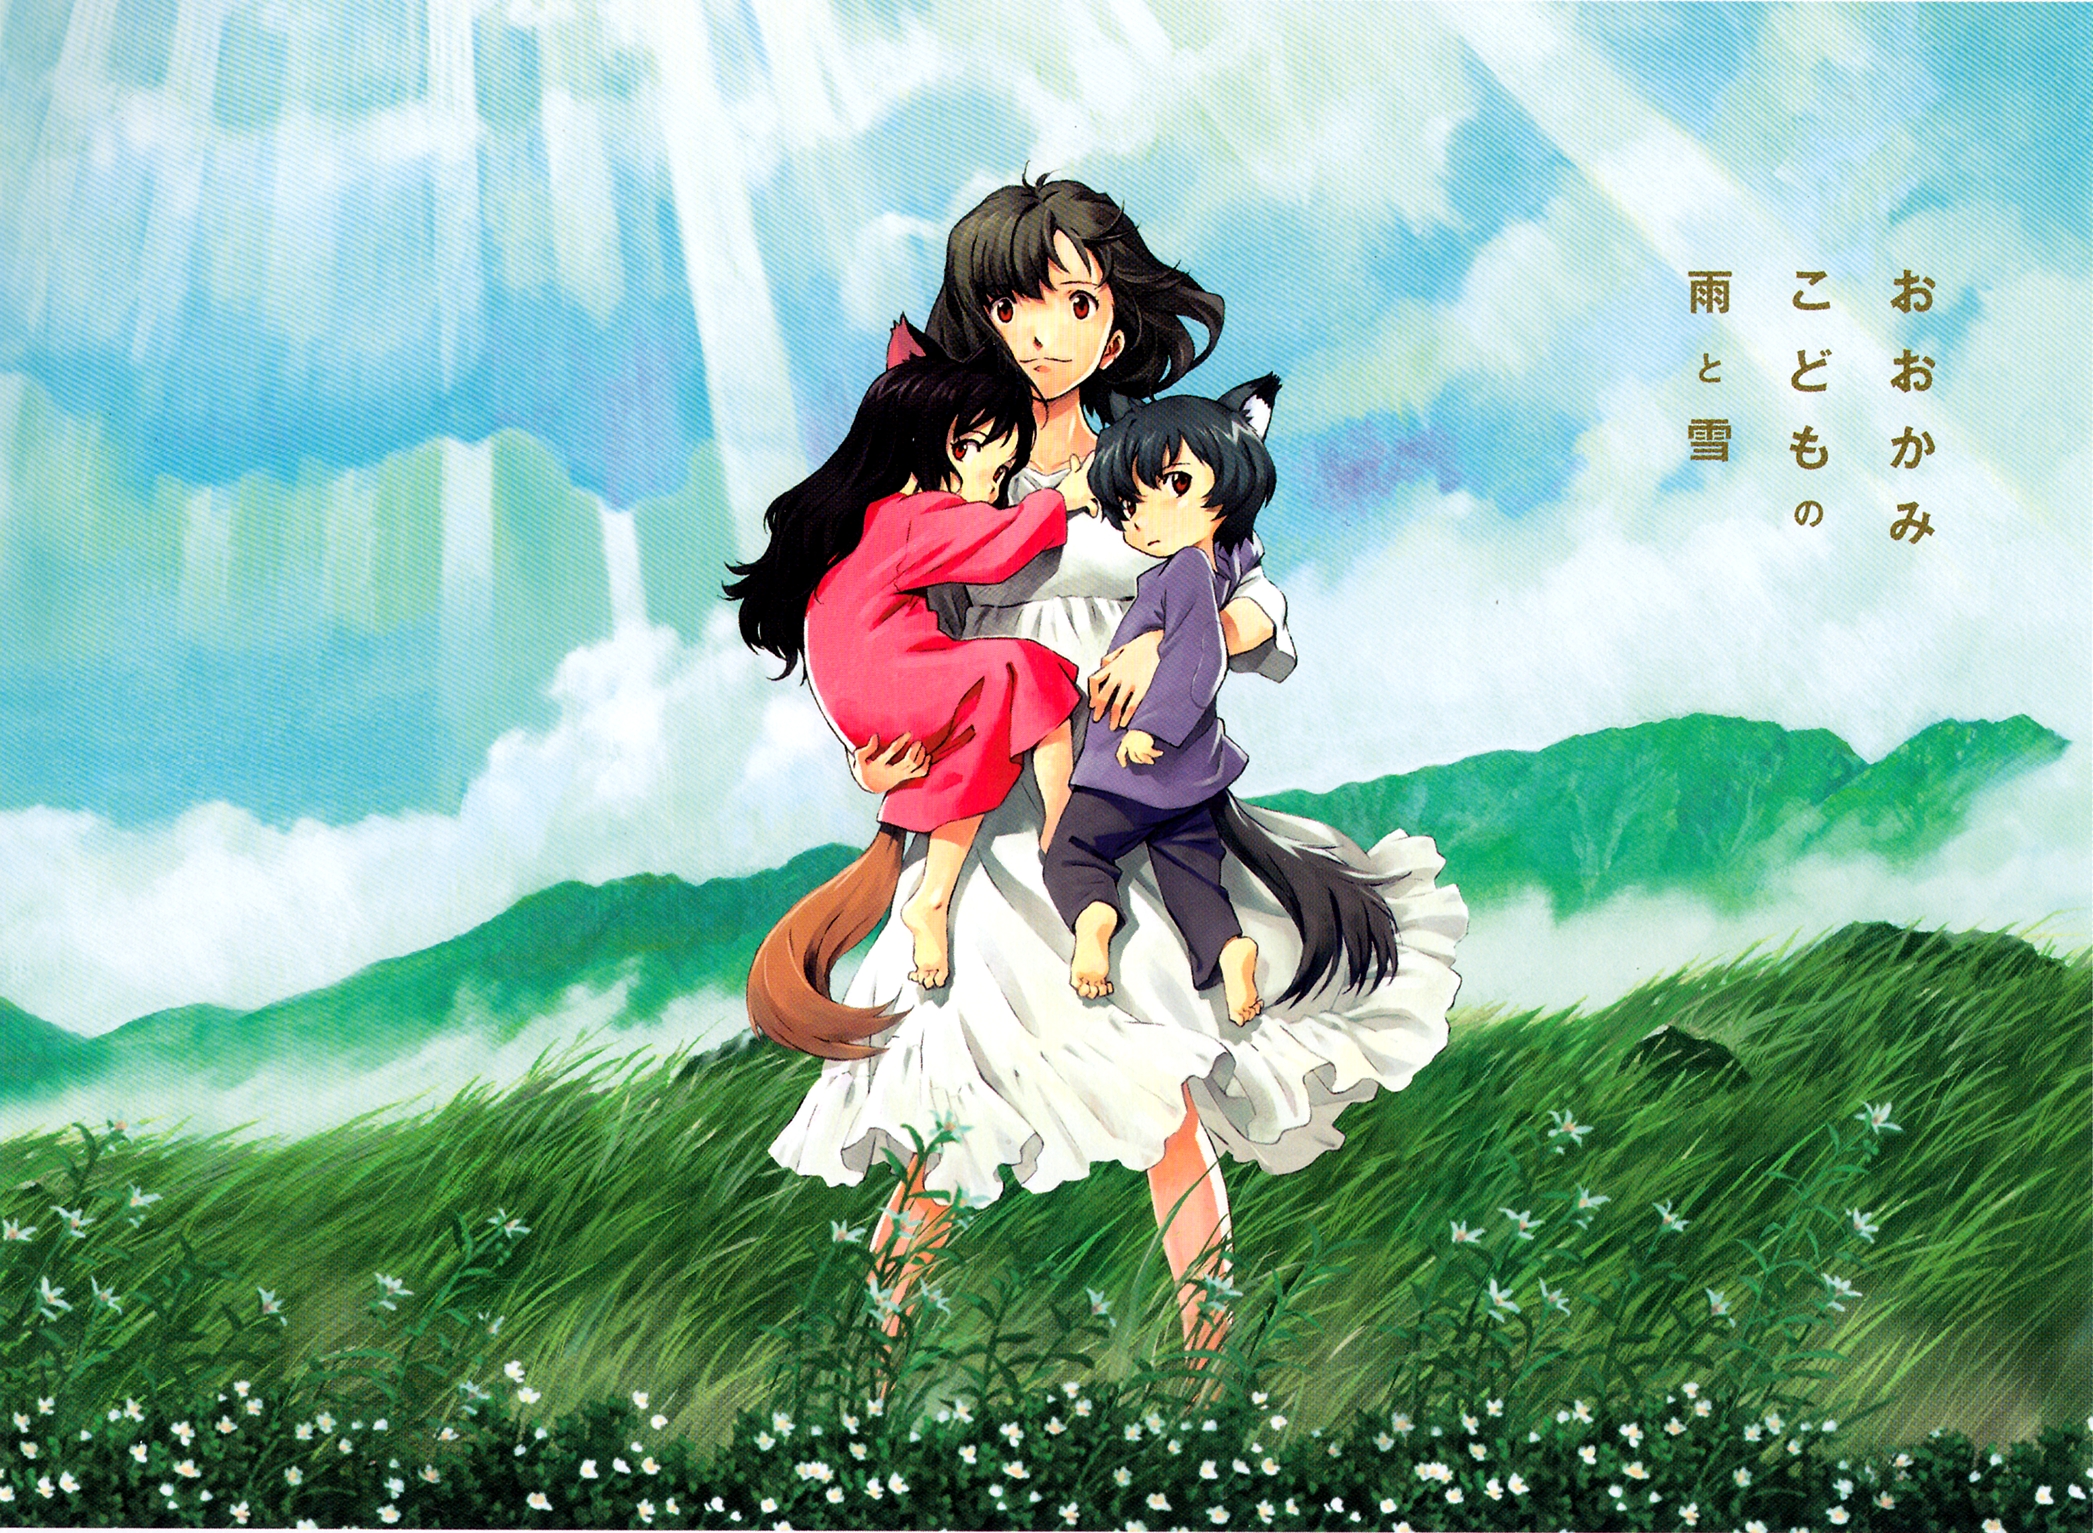 Ookami Kodomo No Ame To Yuki Backgrounds, Compatible - PC, Mobile, Gadgets| 2093x1533 px